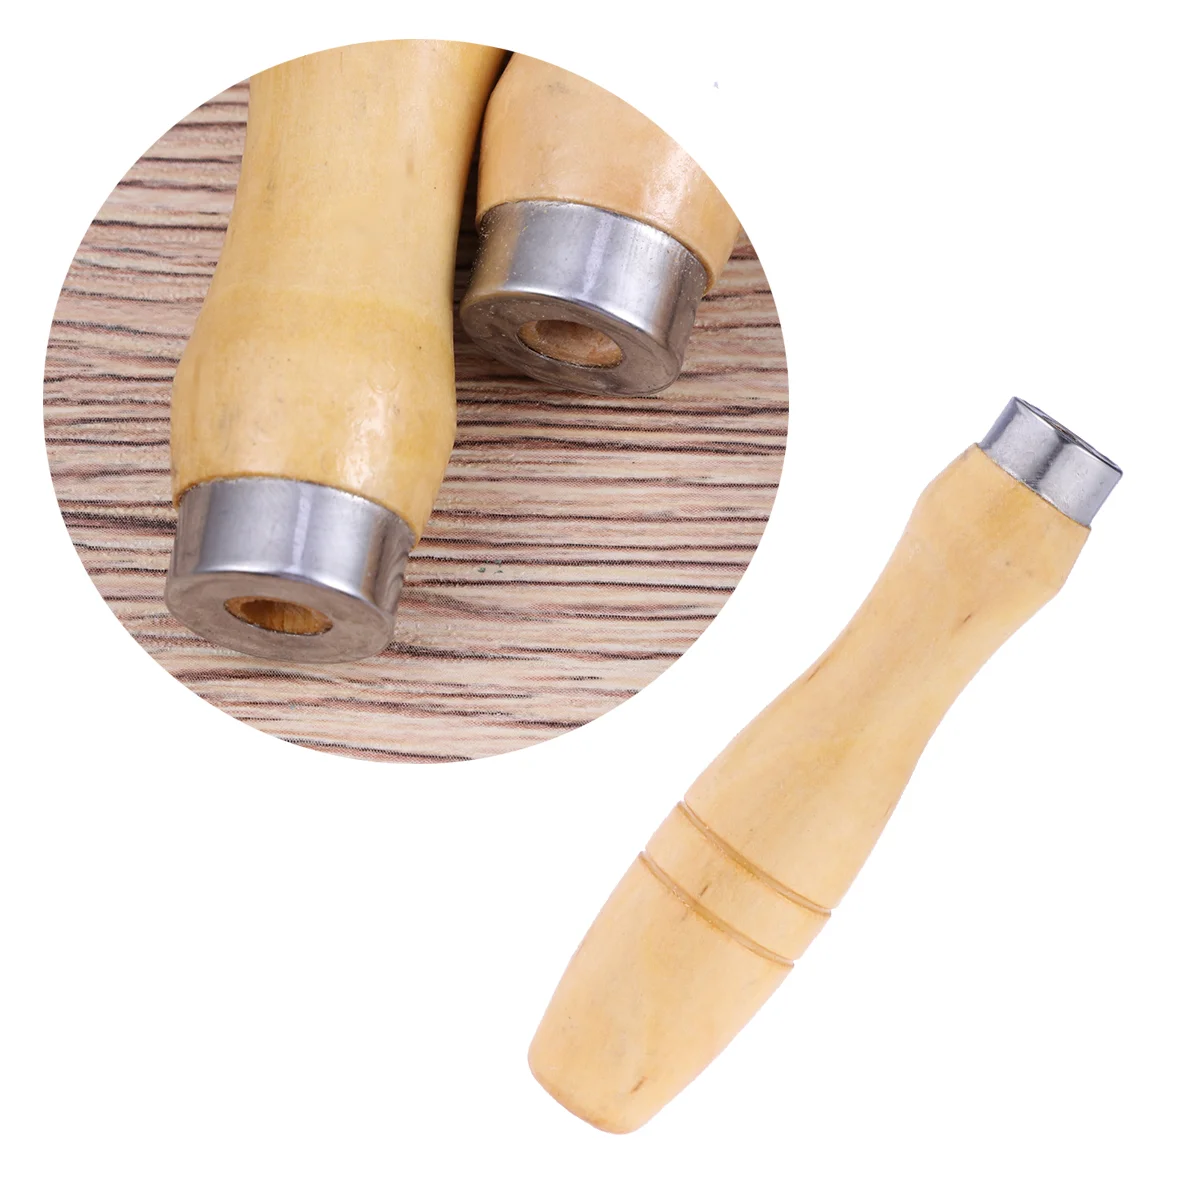 

Handle File Wood Wooden Tool Cutting Files Handles Rasp Craft Woodworking Metal Fit Maintenance Round Half Friction Grip